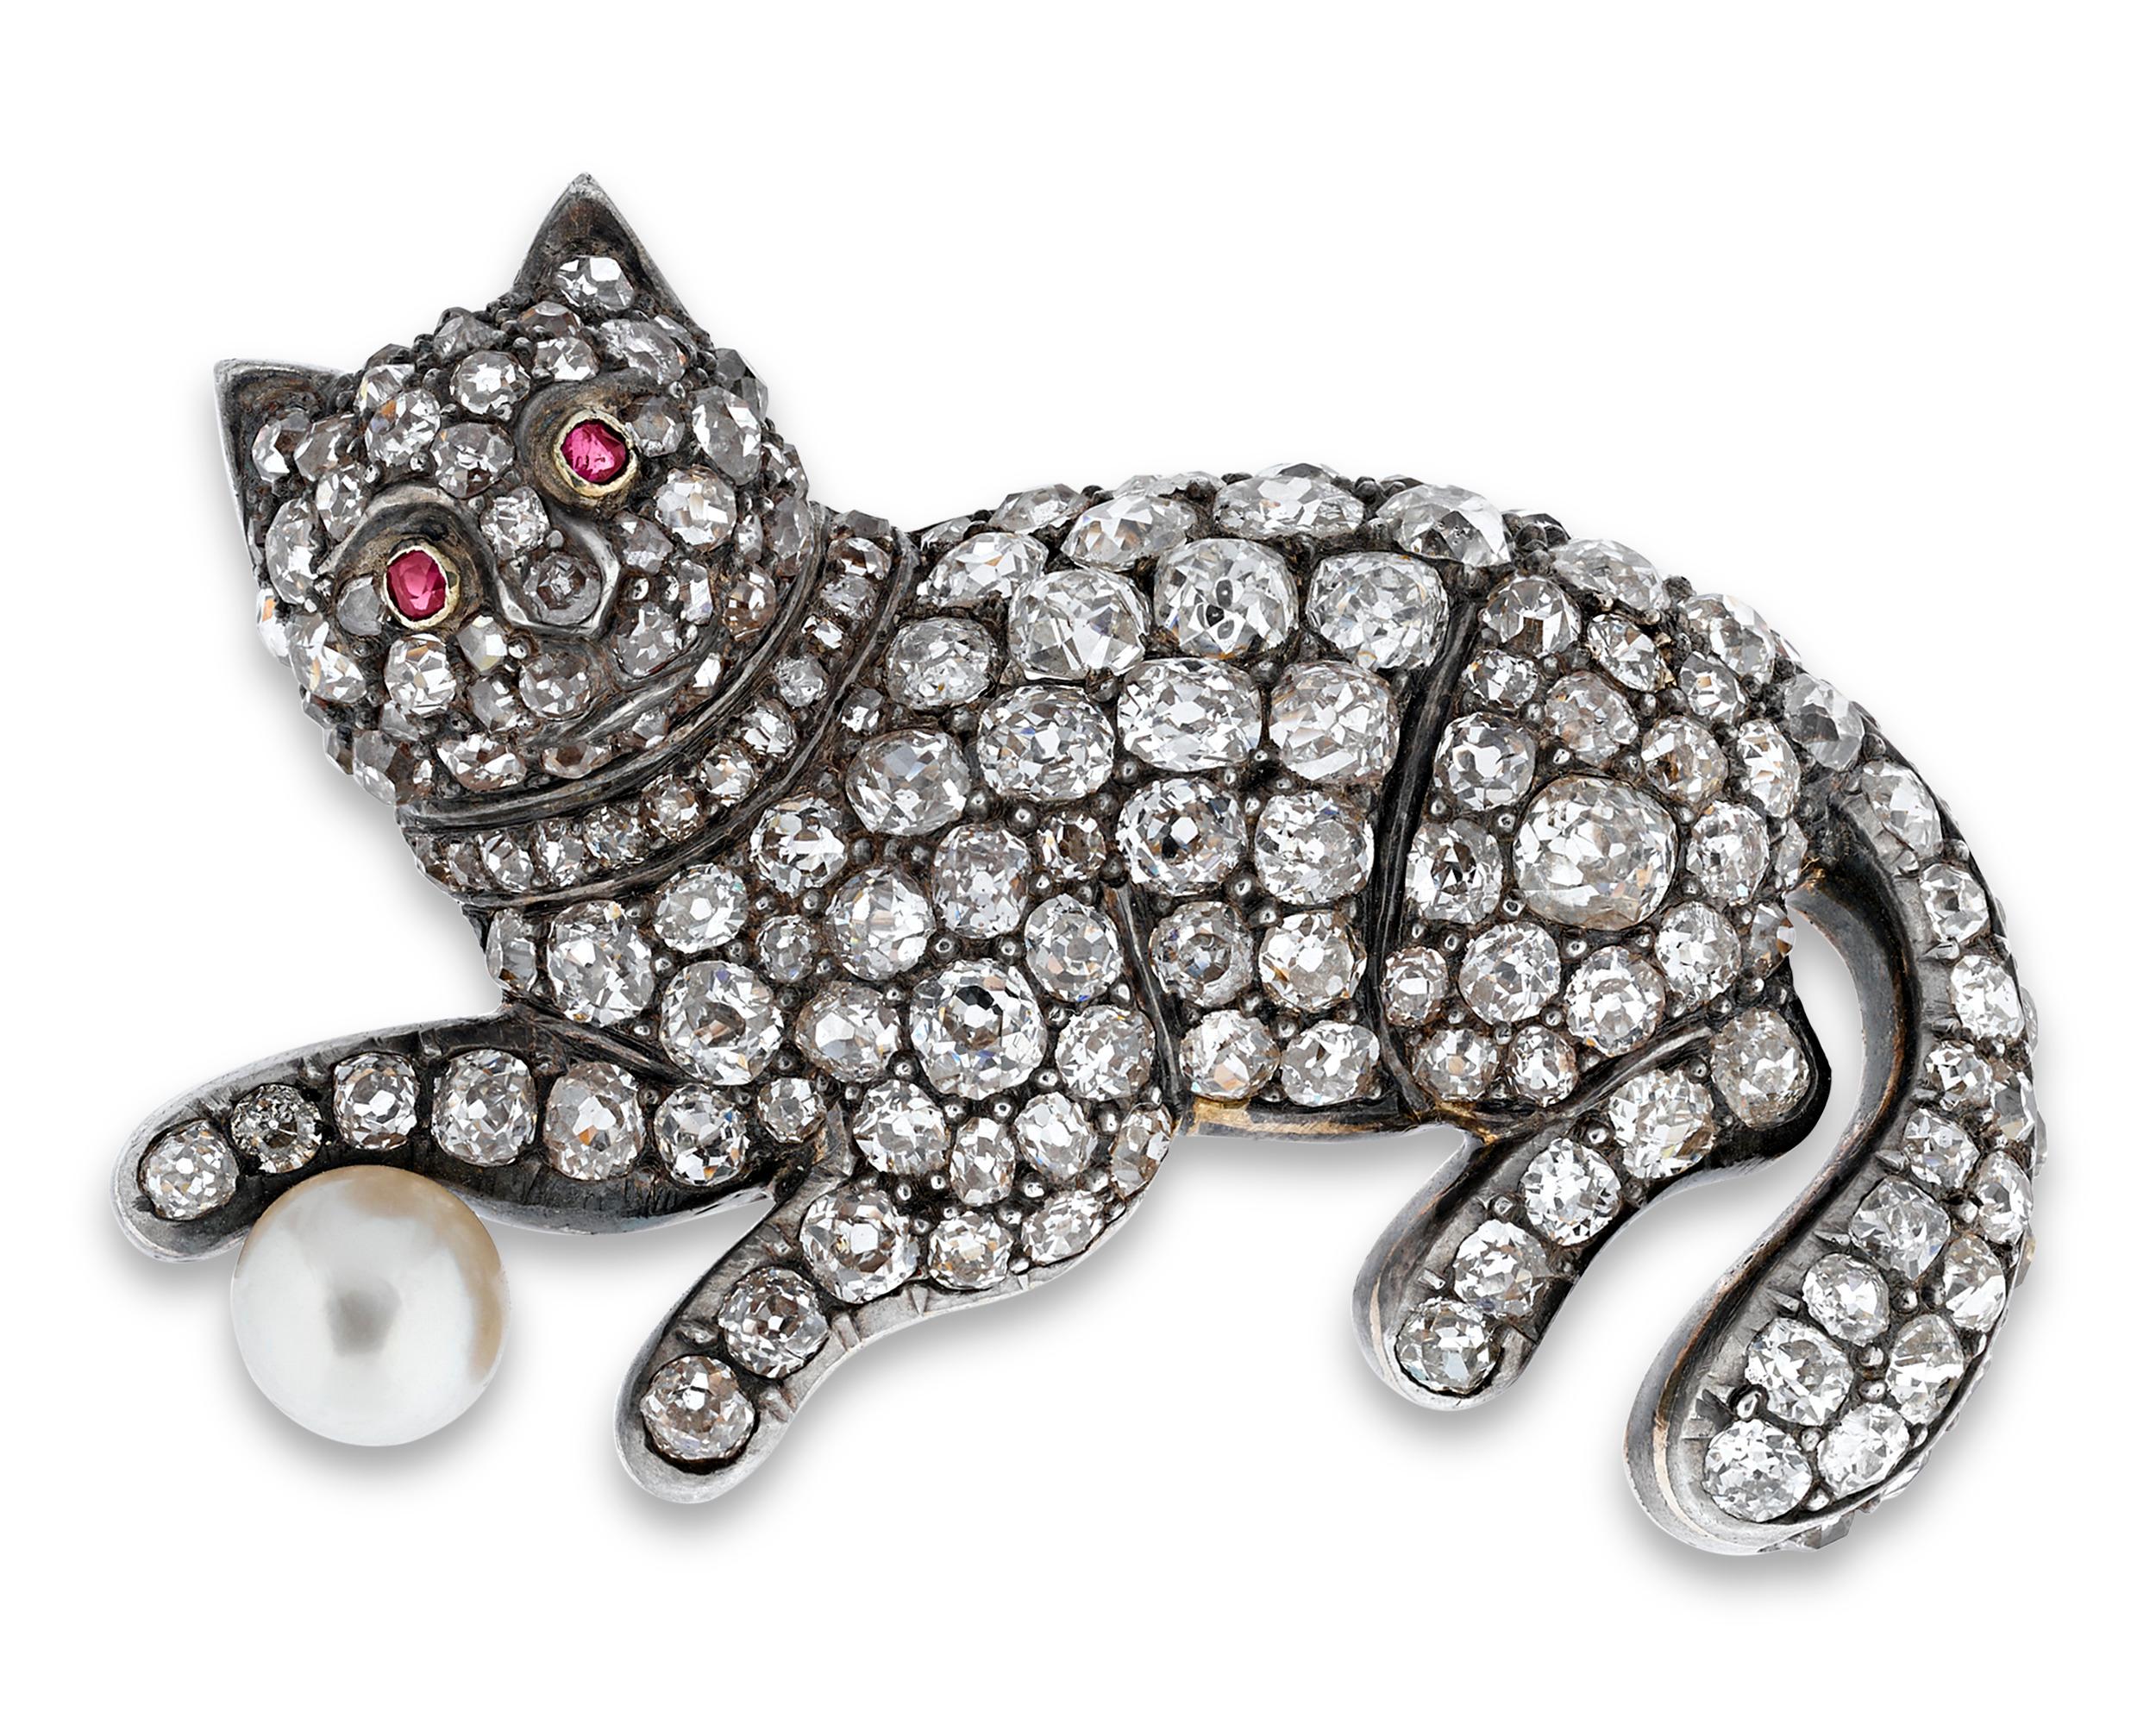 A vision of Victorian charm, this rare period brooch takes the form of a frisky feline. As delightful as it is dazzling, this languorous cat sparkles from head to paw with 4.60 total carats of diamonds, while her red ruby eyes smolder against her